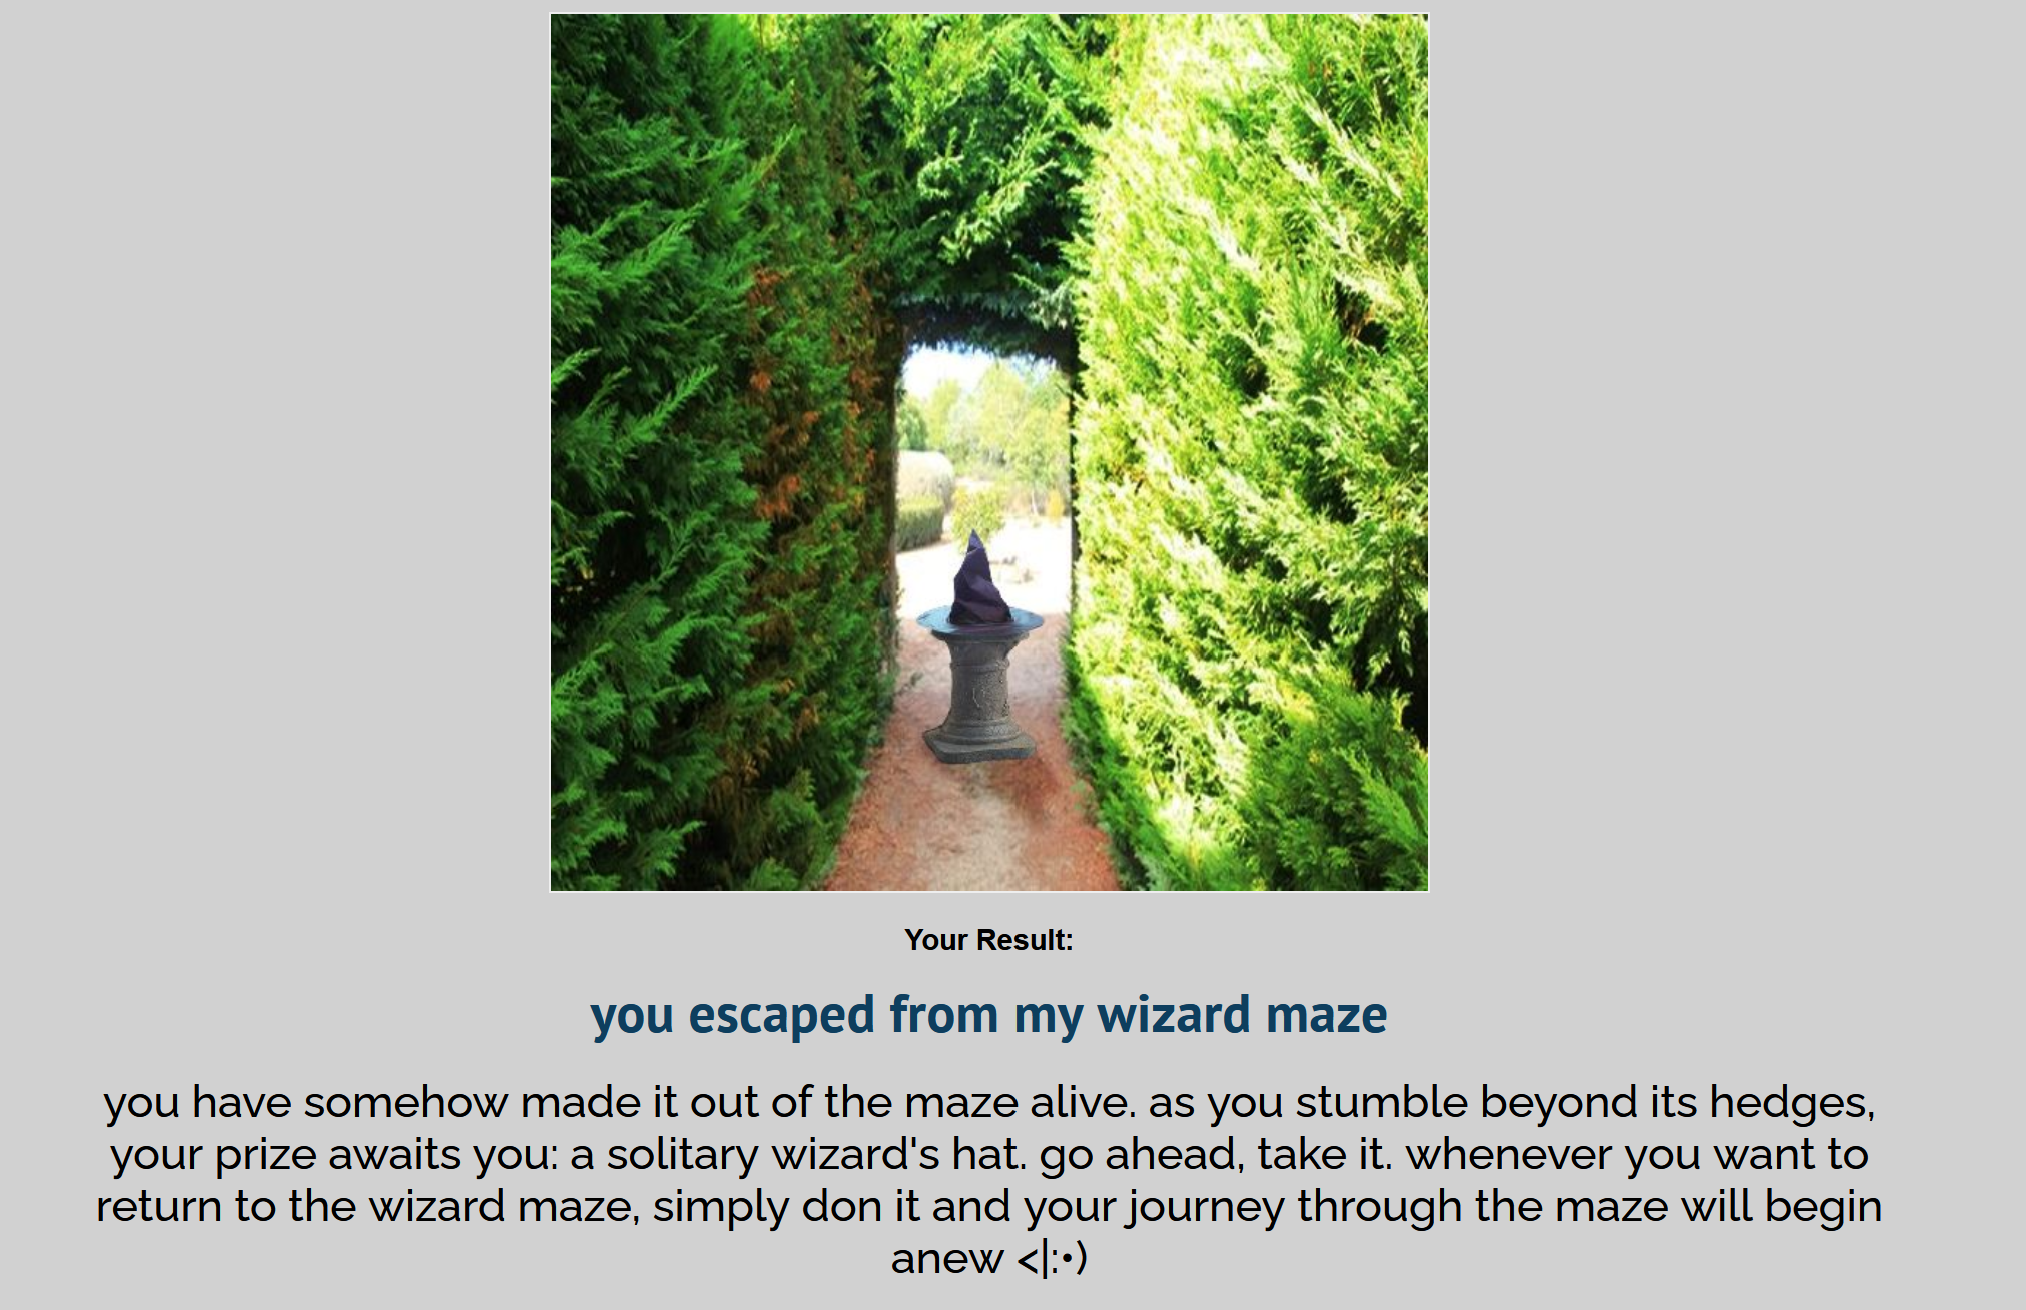 UQuiz end screen for the result 'you escaped from my wizard maze'. There is an image of a wizard hat upon a pedestal at the end of a hedge maze. Result text reads, 'you have somehow made it out of the maze alive. as you stumble beyond its hedges, your prize awaits you: a solitary wizard's hat. go ahead, take it. whenever you want to return to the wizard maze, simply don it and your journey through the maze will begin anew <|:•) [emoticon resembles a smiling face in a wizard hat]'